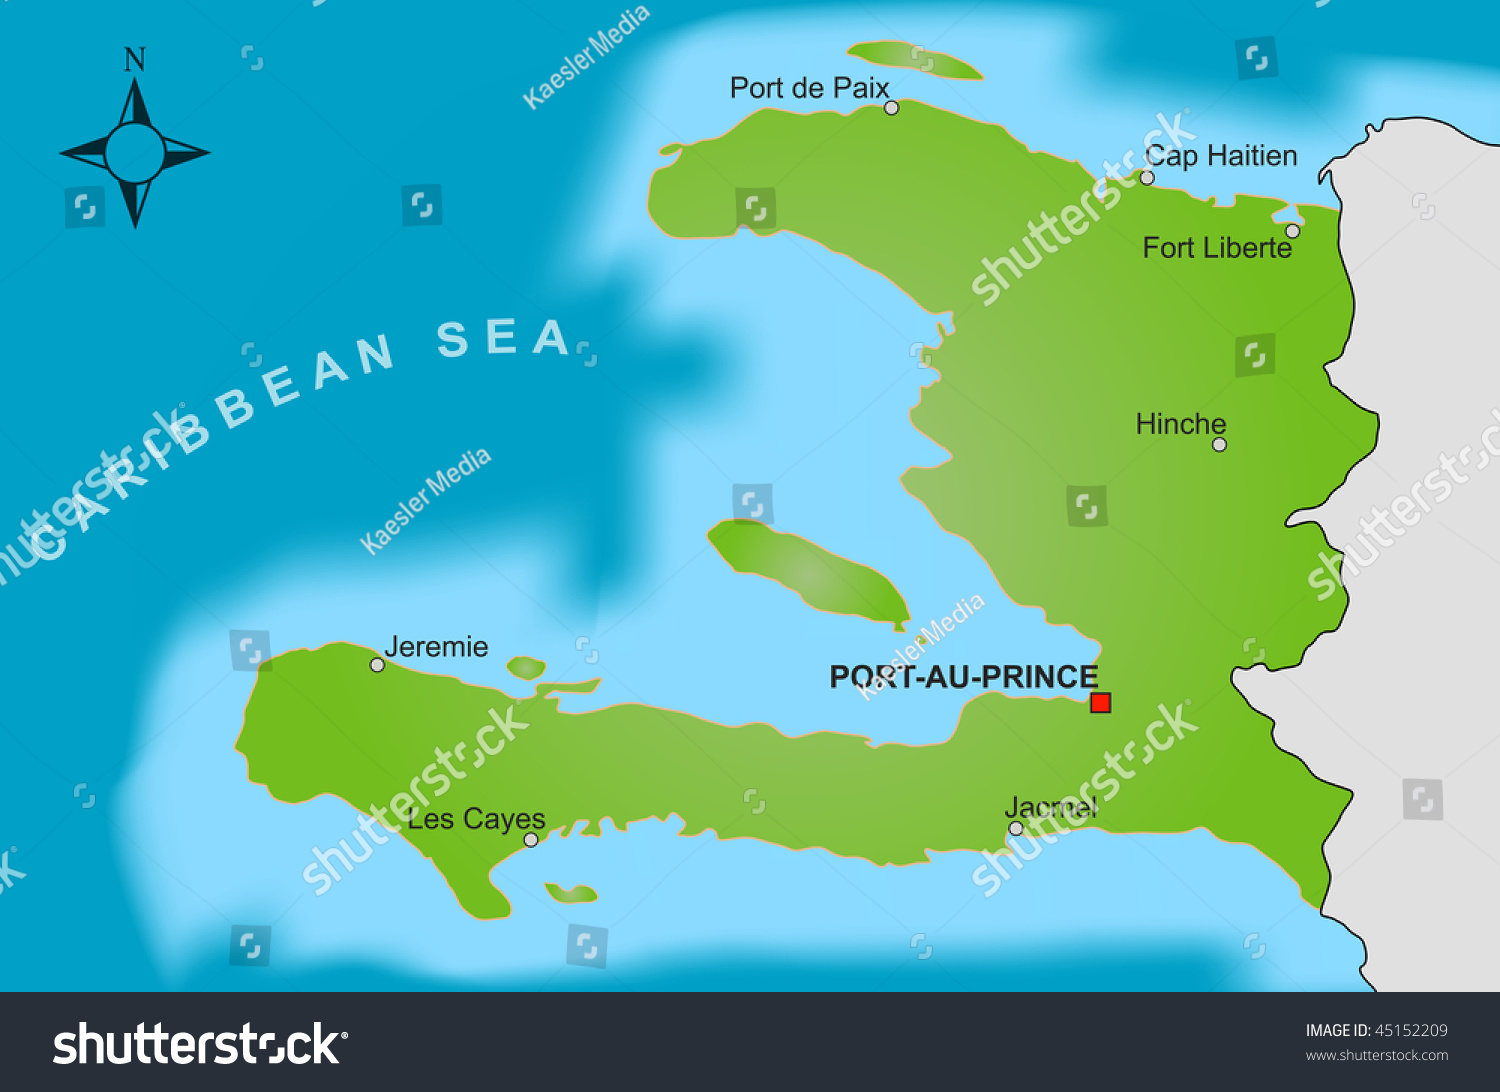 Find Stylized Map Haiti Showing Different Big stock images in HD and millio...